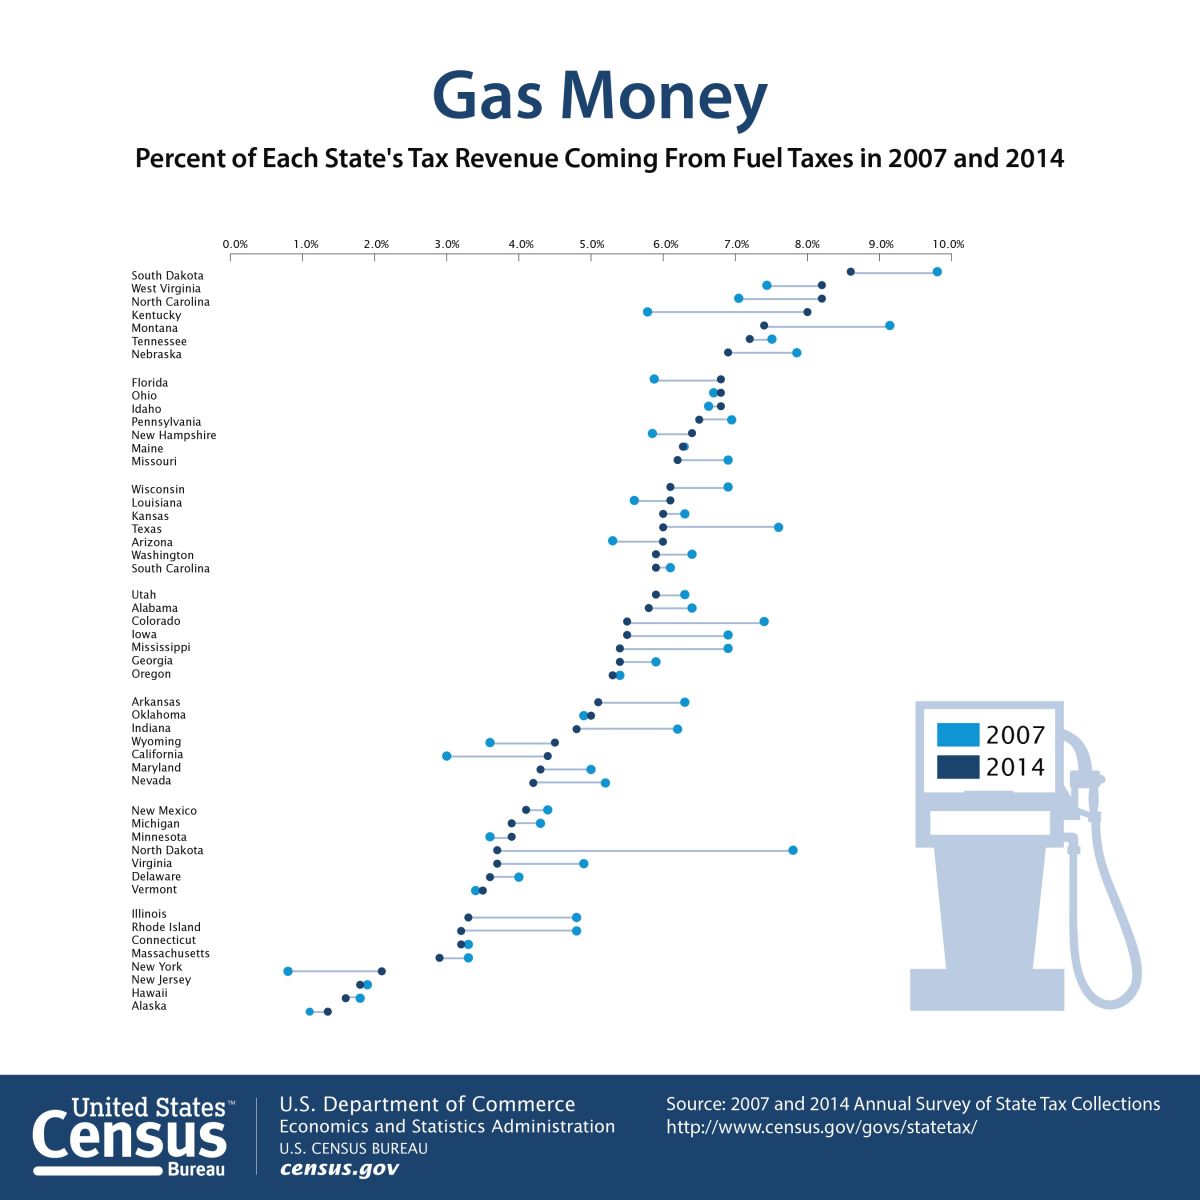 Gas tax as percent of state revenue